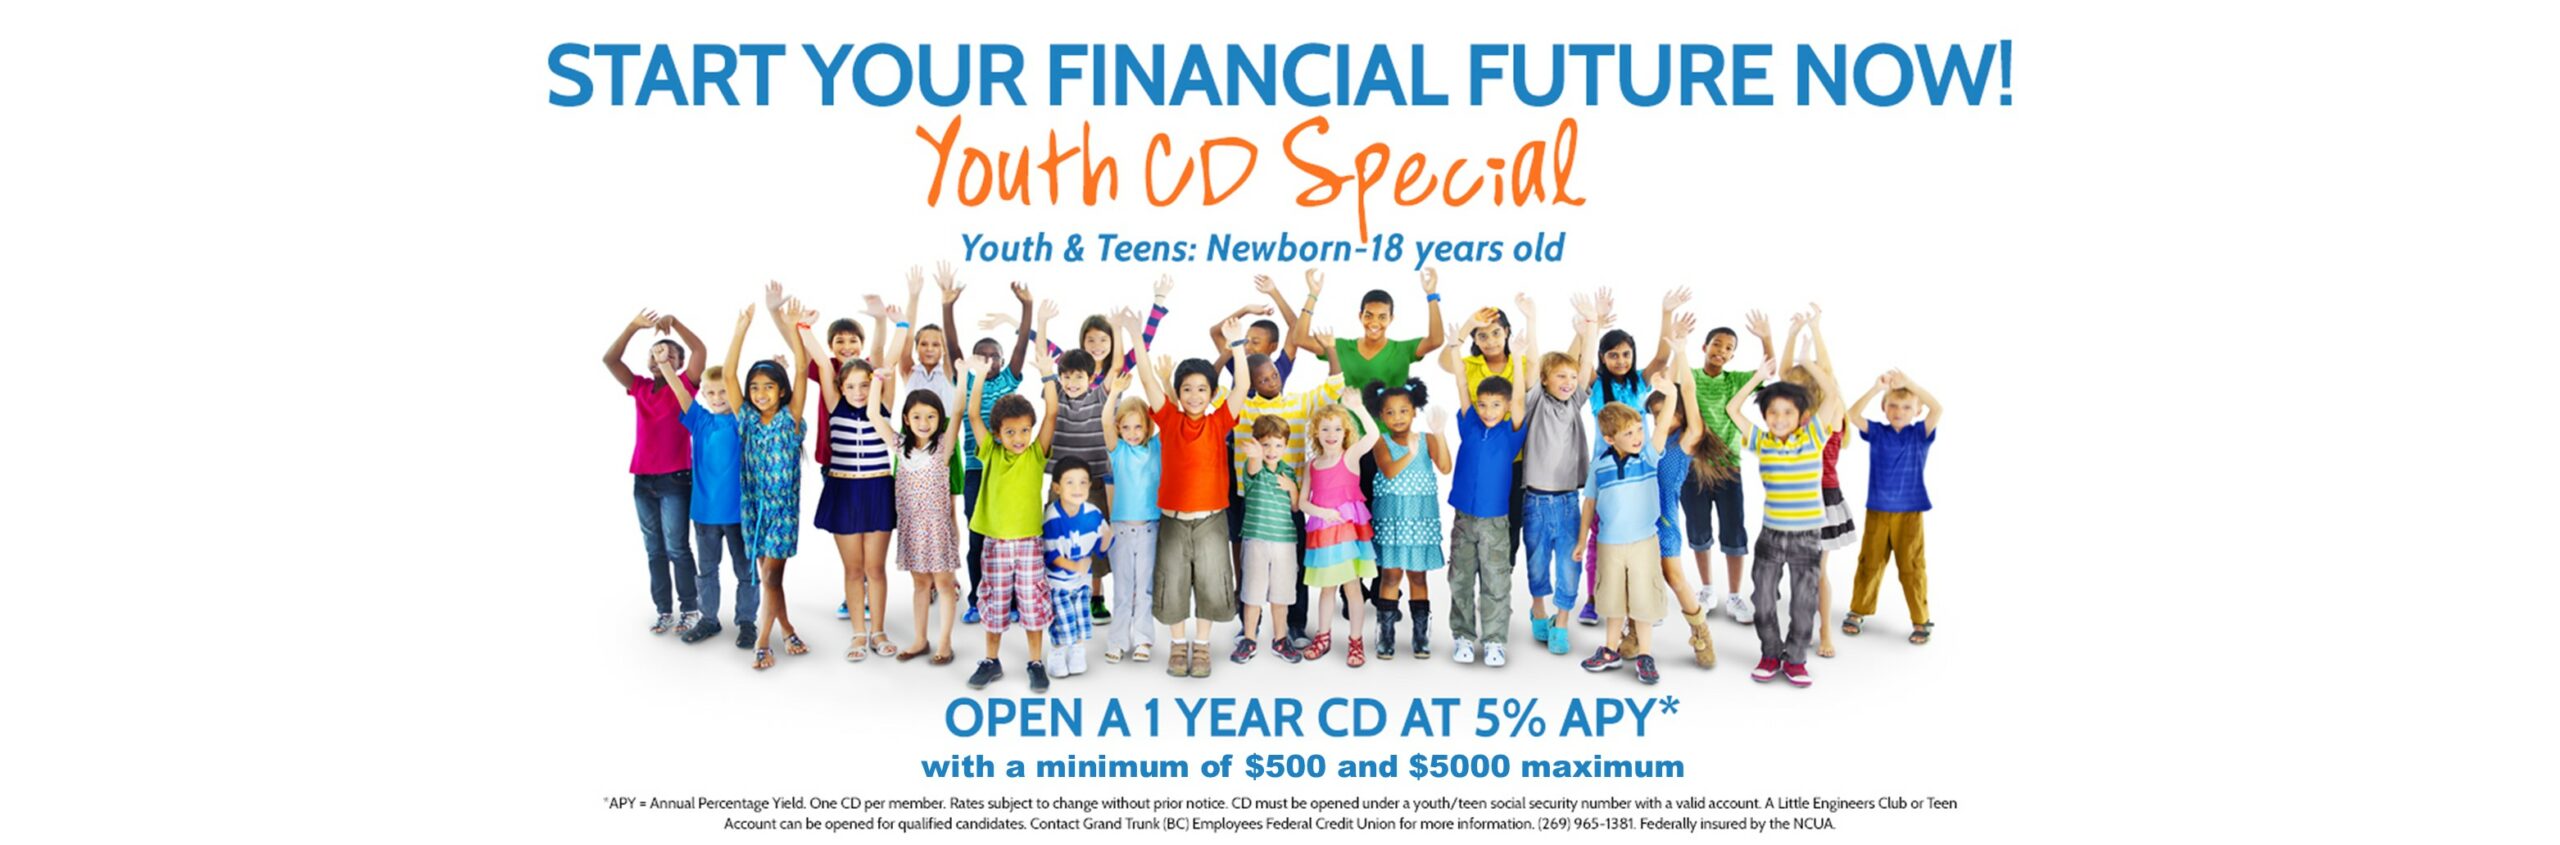 Start your financial future now! Youth CD Special youth & Teens: Newborn to 18 years old. Open a 1 year CD at 5% APY with a min. $500 and $5000 Max. 